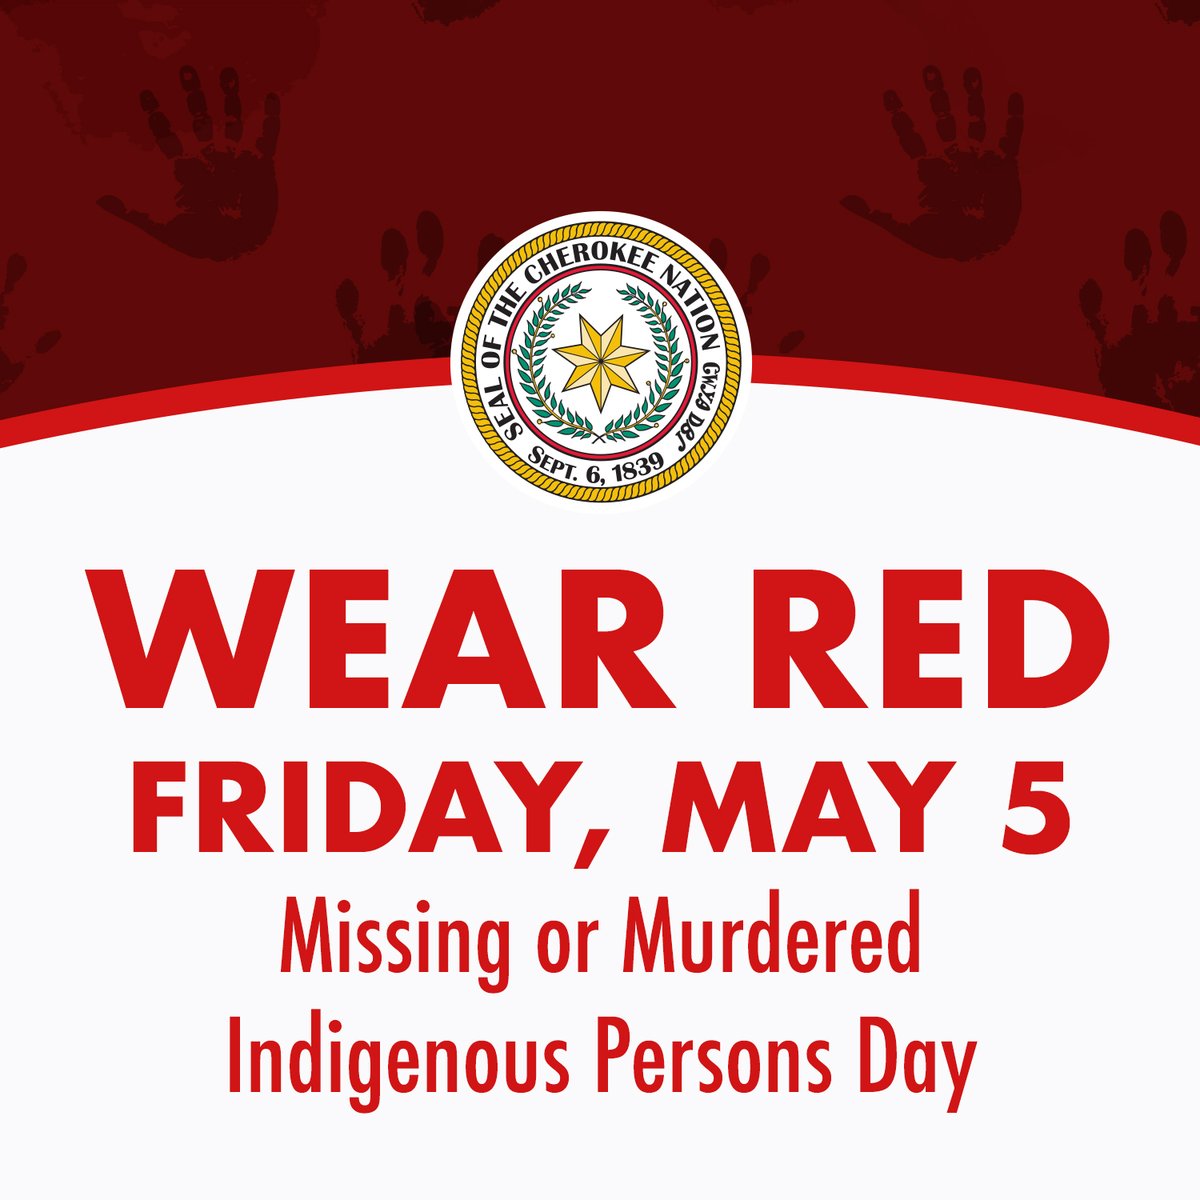 We’ll be wearing red here in the Cherokee Nation tomorrow for the National Day of Awareness for Missing or Murdered Indigenous Women and Girls to show support for the Missing or Murdered Indigenous People movement. Join us by wearing red wherever you are! ❤️ #MMIP #WhyWeWearRed